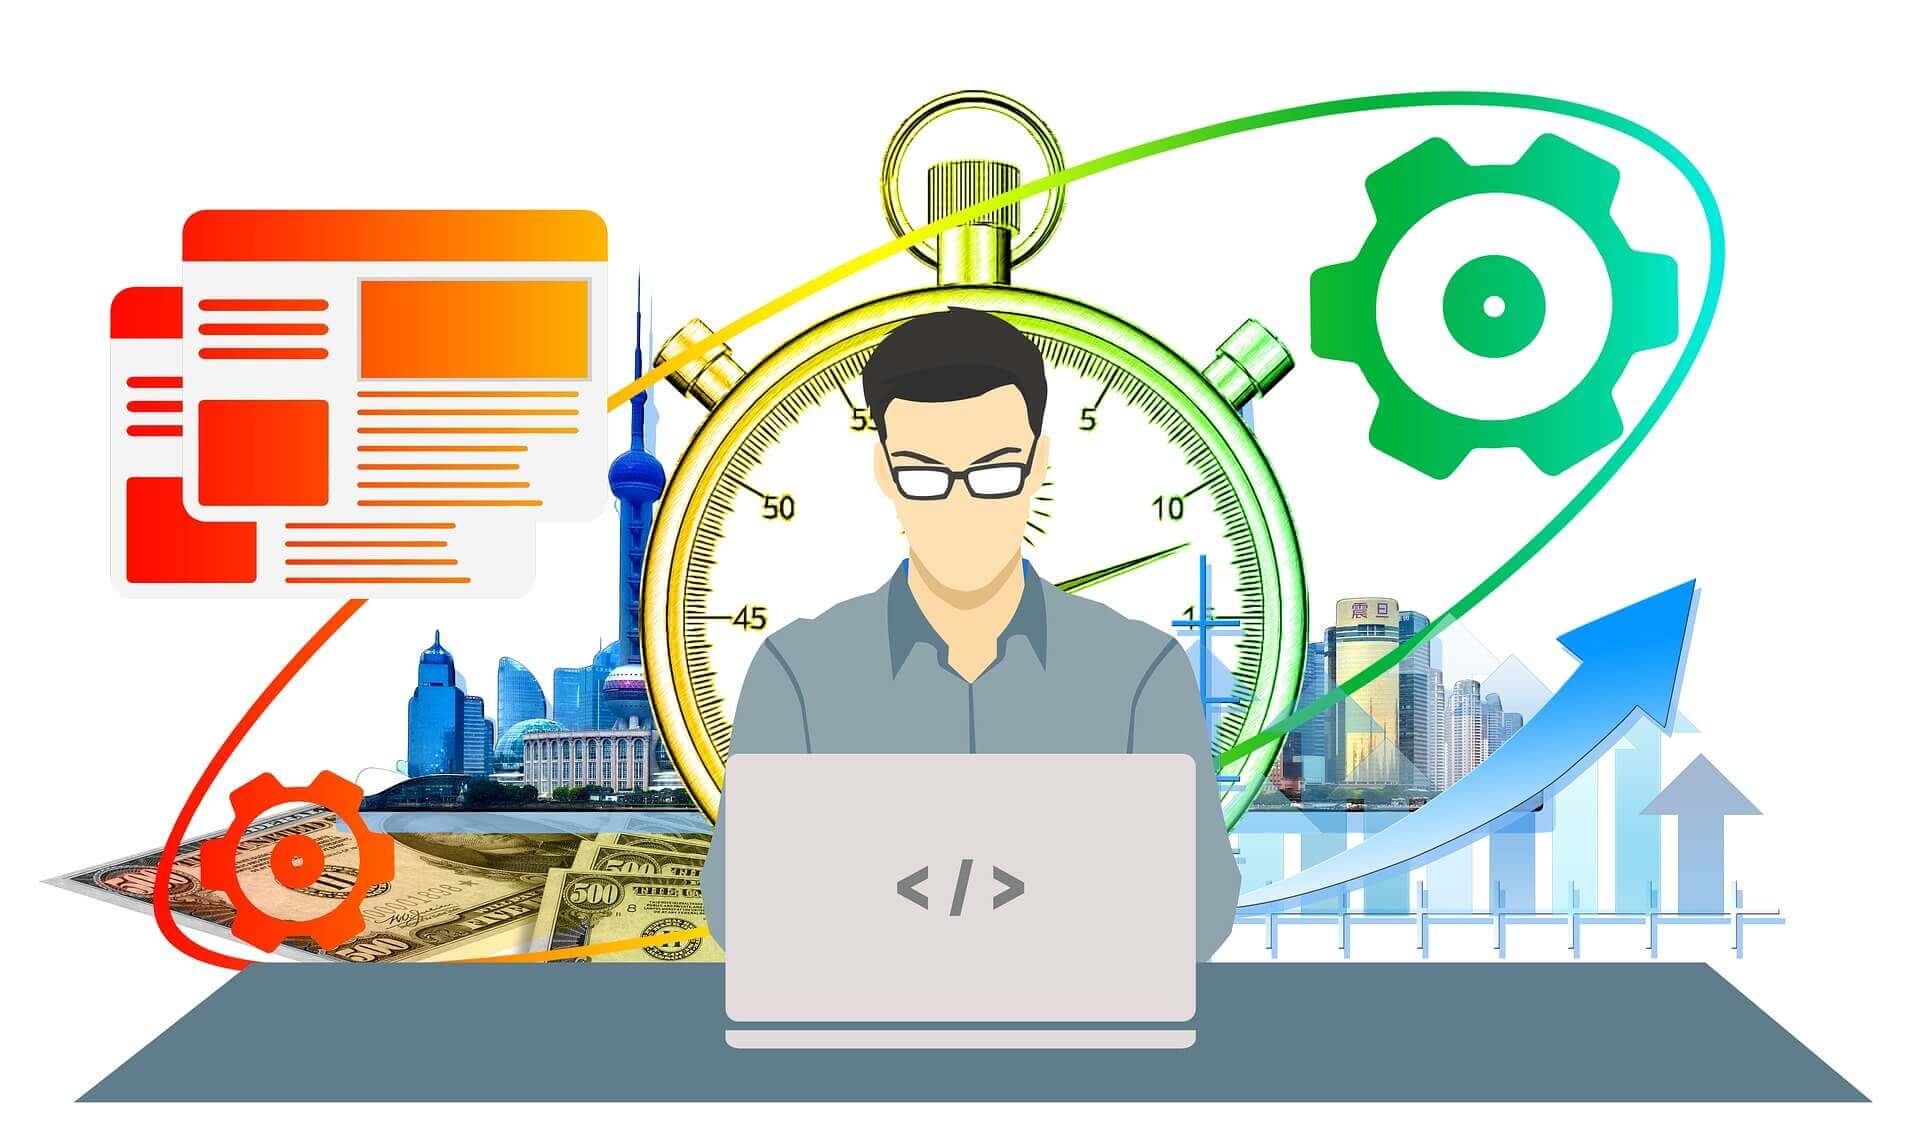 An illustration where a freelancer is working on his laptop, having symbols of tools, clock, growth, and money in the backdrop